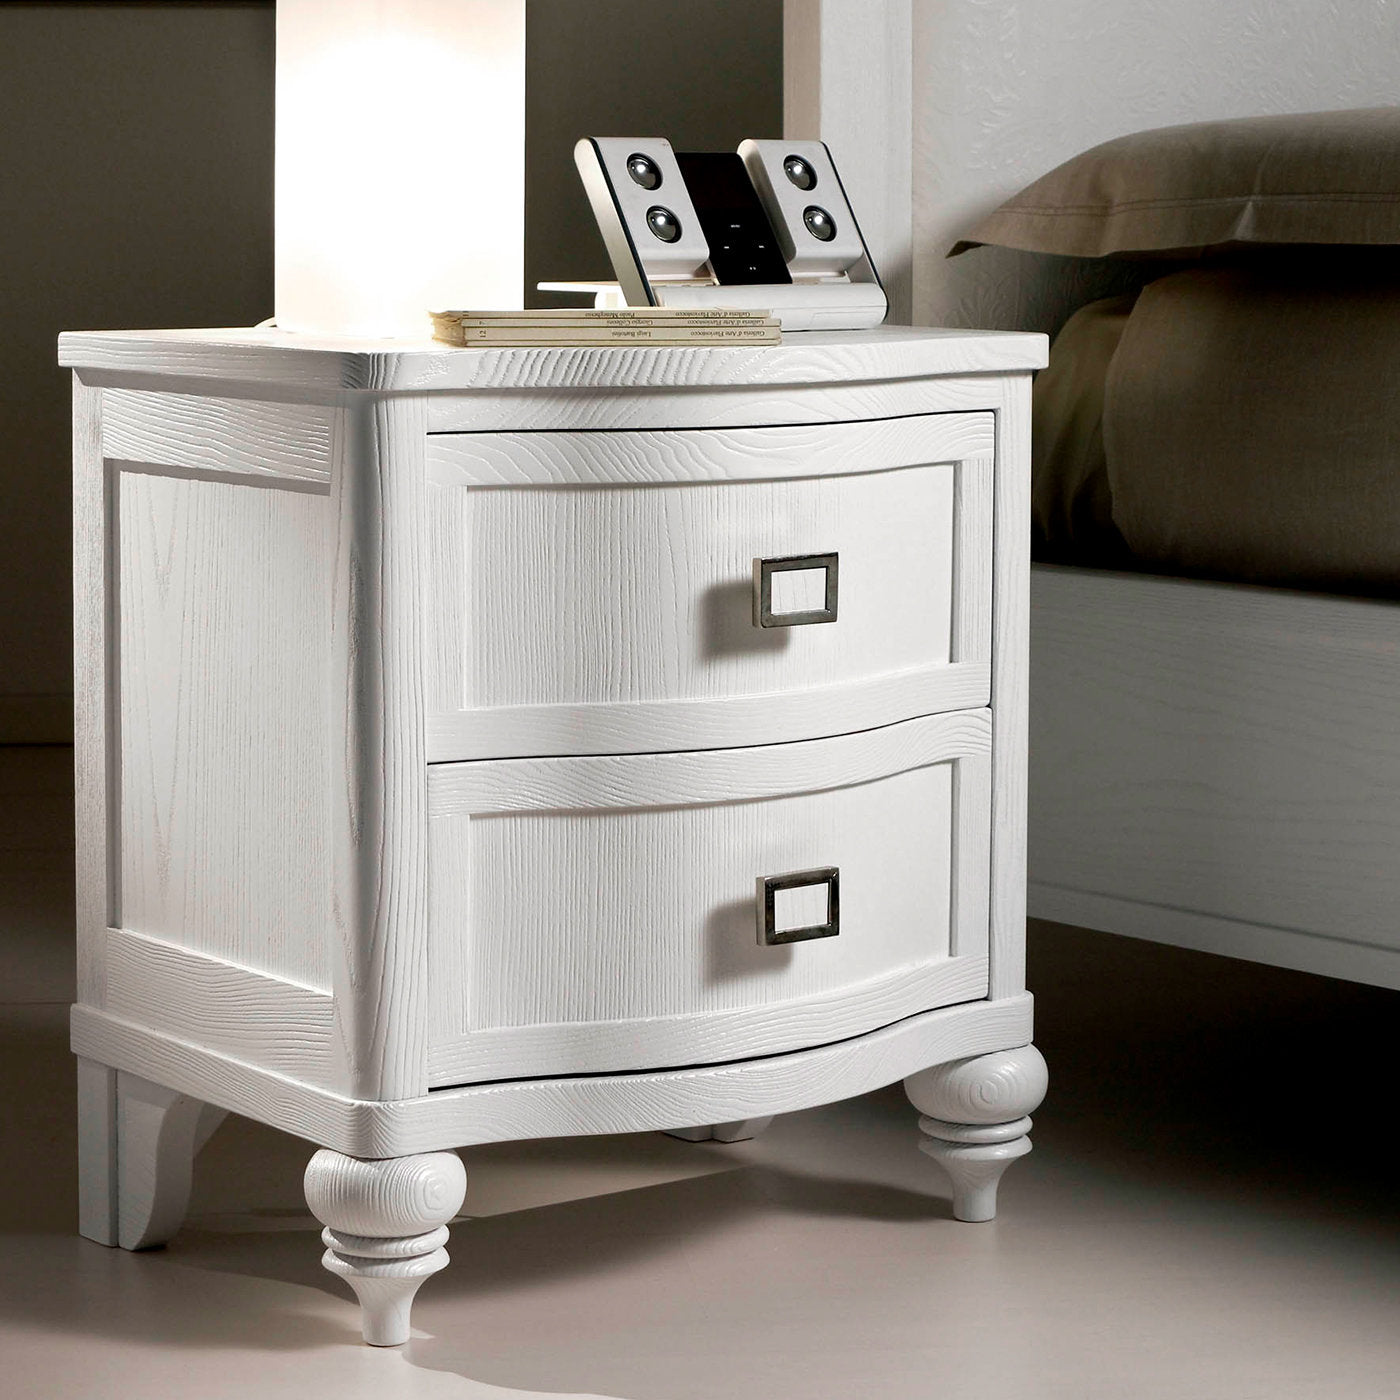 Contoured Bedside Table - Alternative view 1